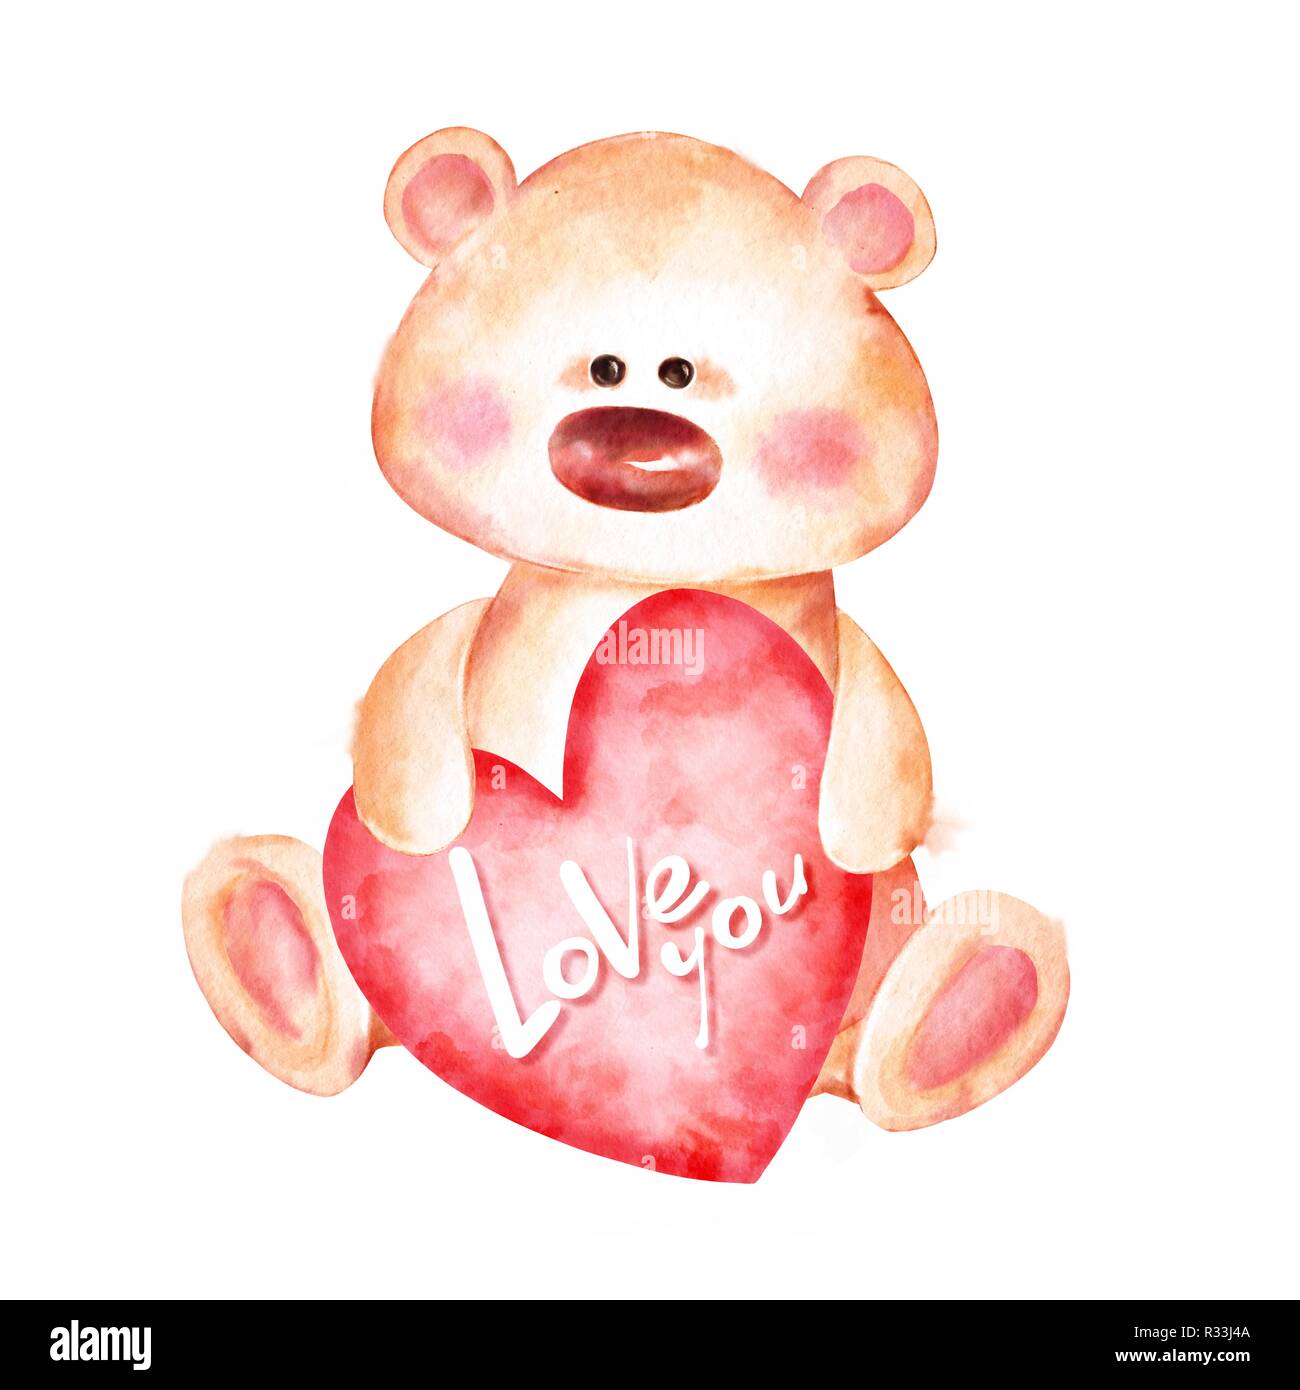 Cute teddy bear and red heart. Watercolor Stock Photo